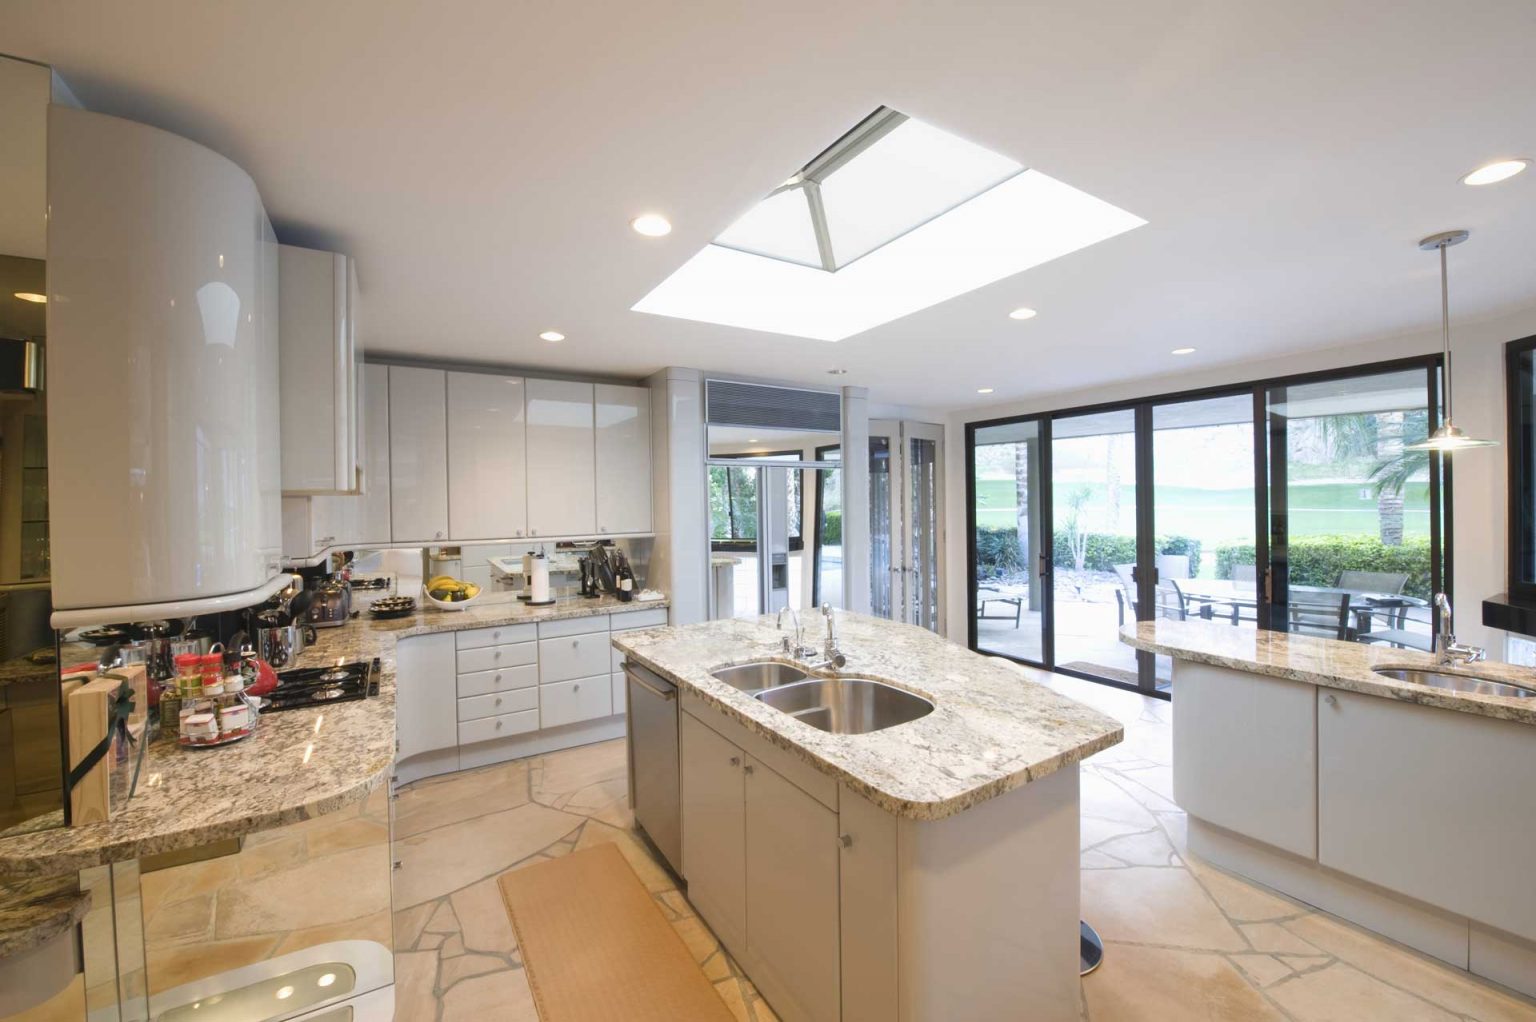 Kitchen Extensions with Lantern and Bifold Doors